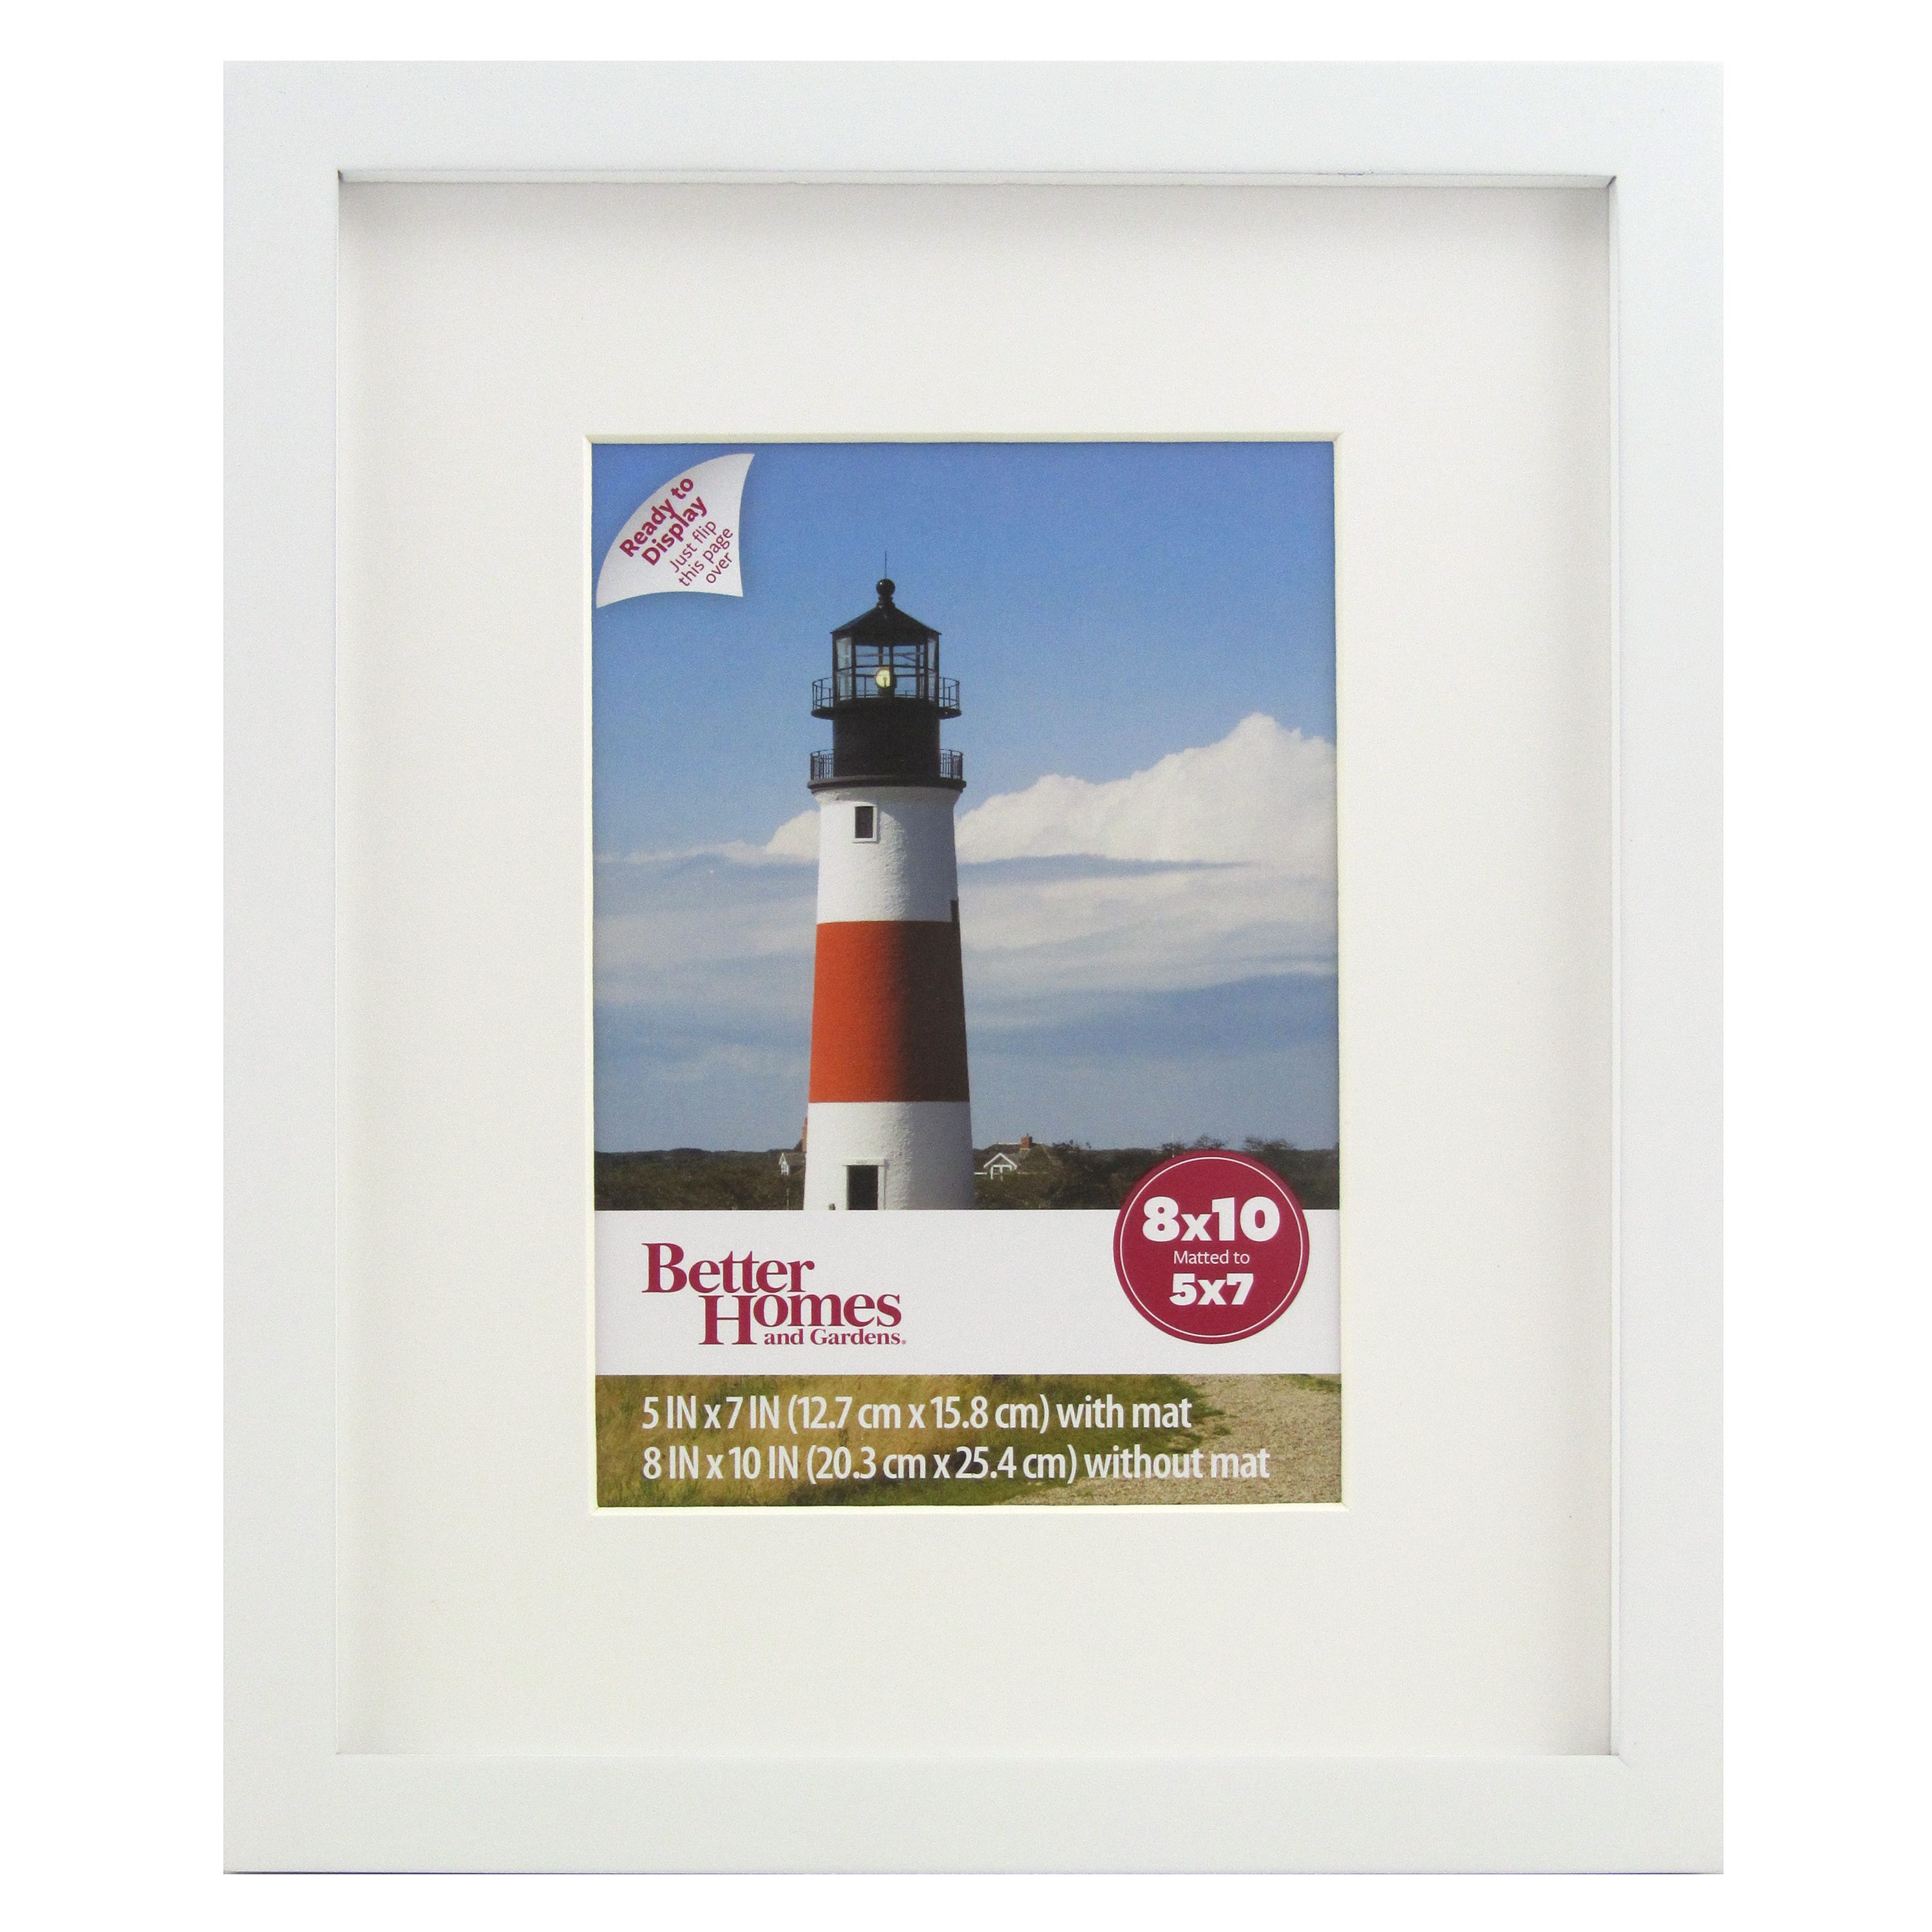 Better Homes and Gardens 8x10 Gallery Picture Frame, White - image 1 of 2